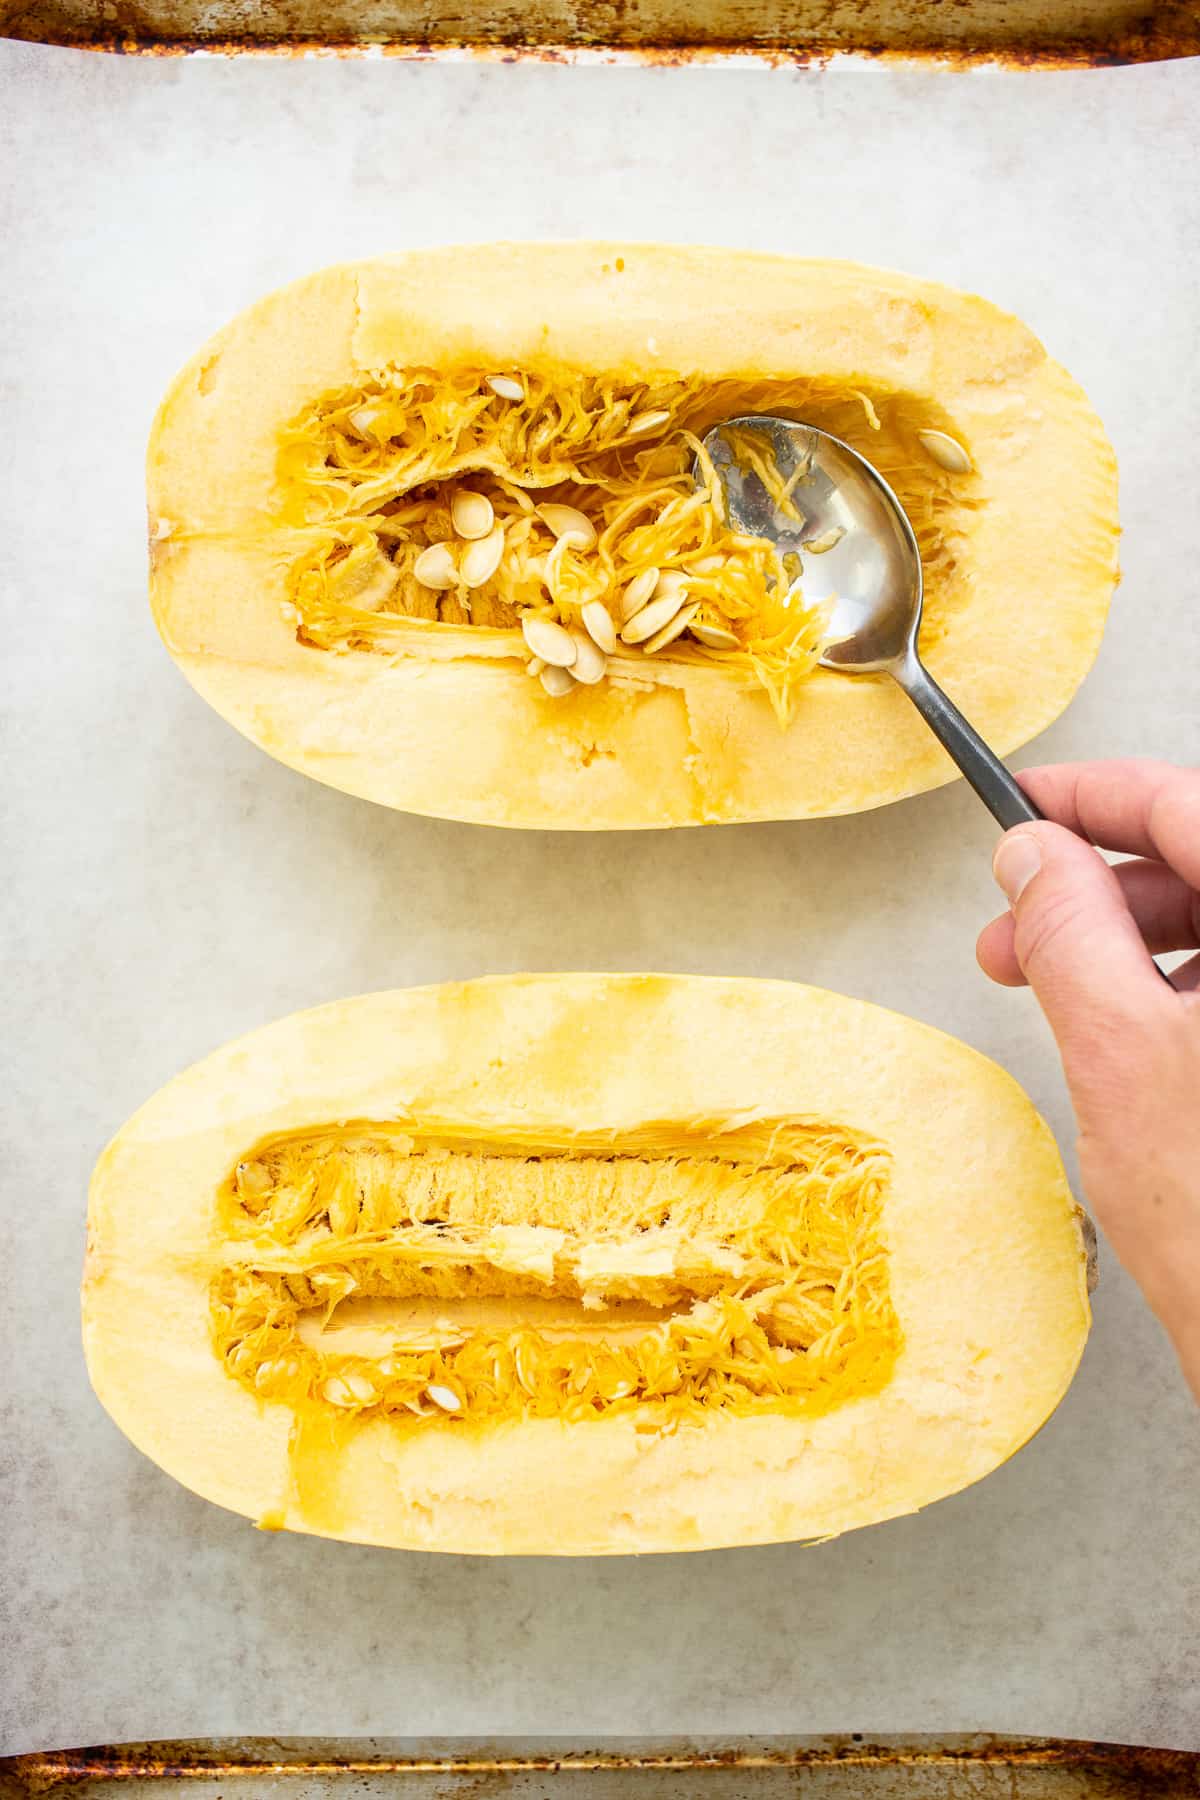 spooning out innards of squash.